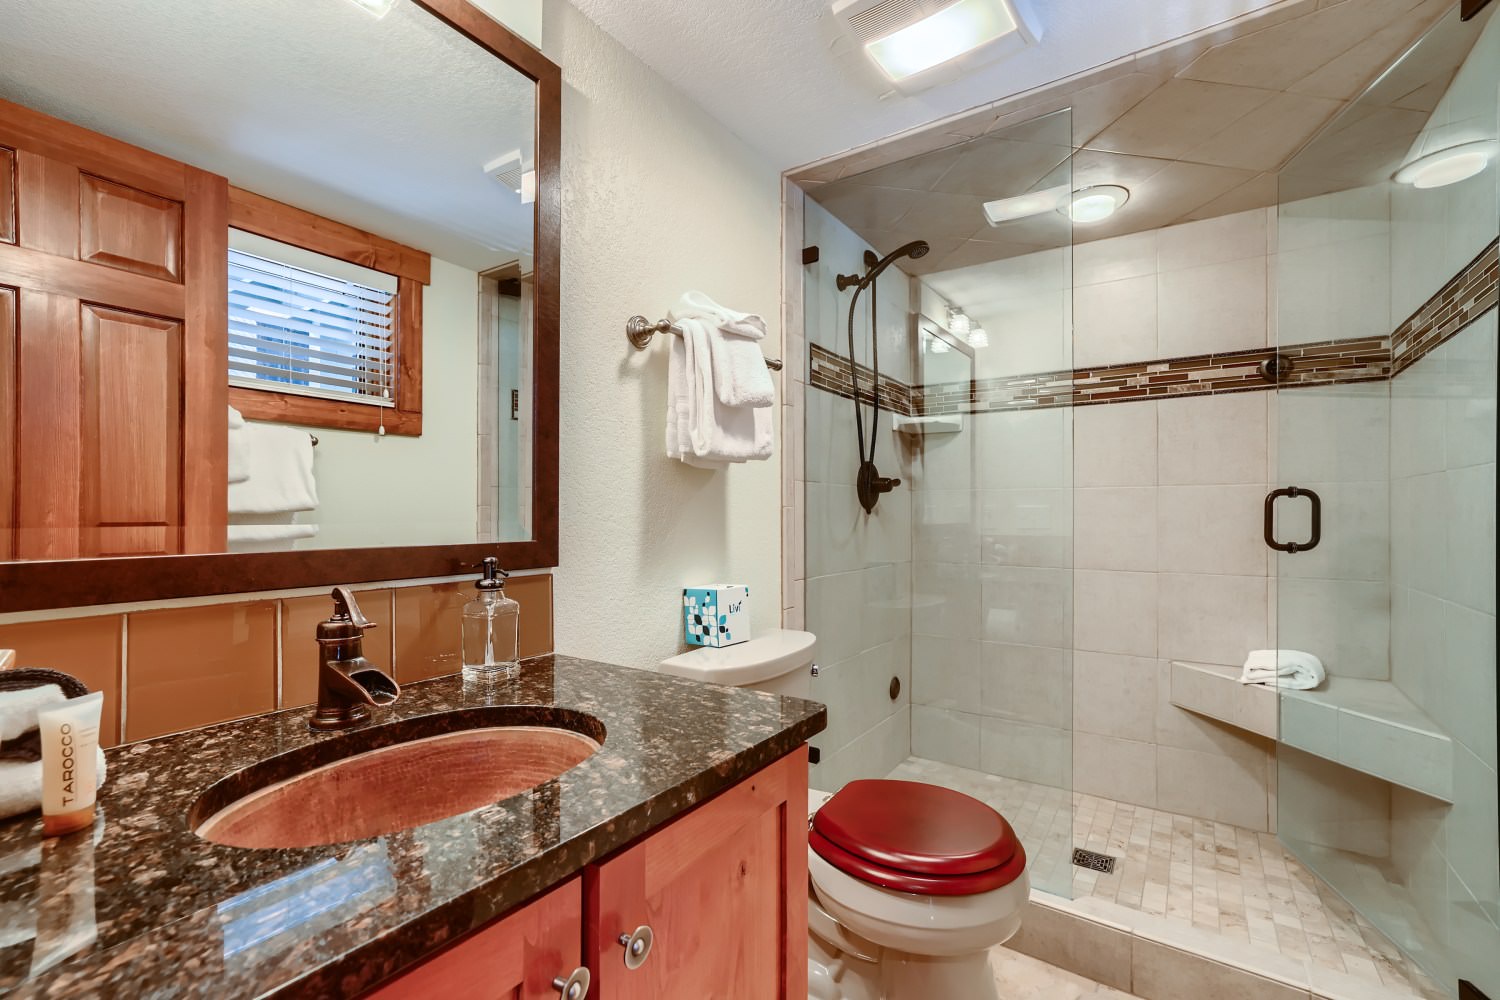 Shared bathroom with stand up shower